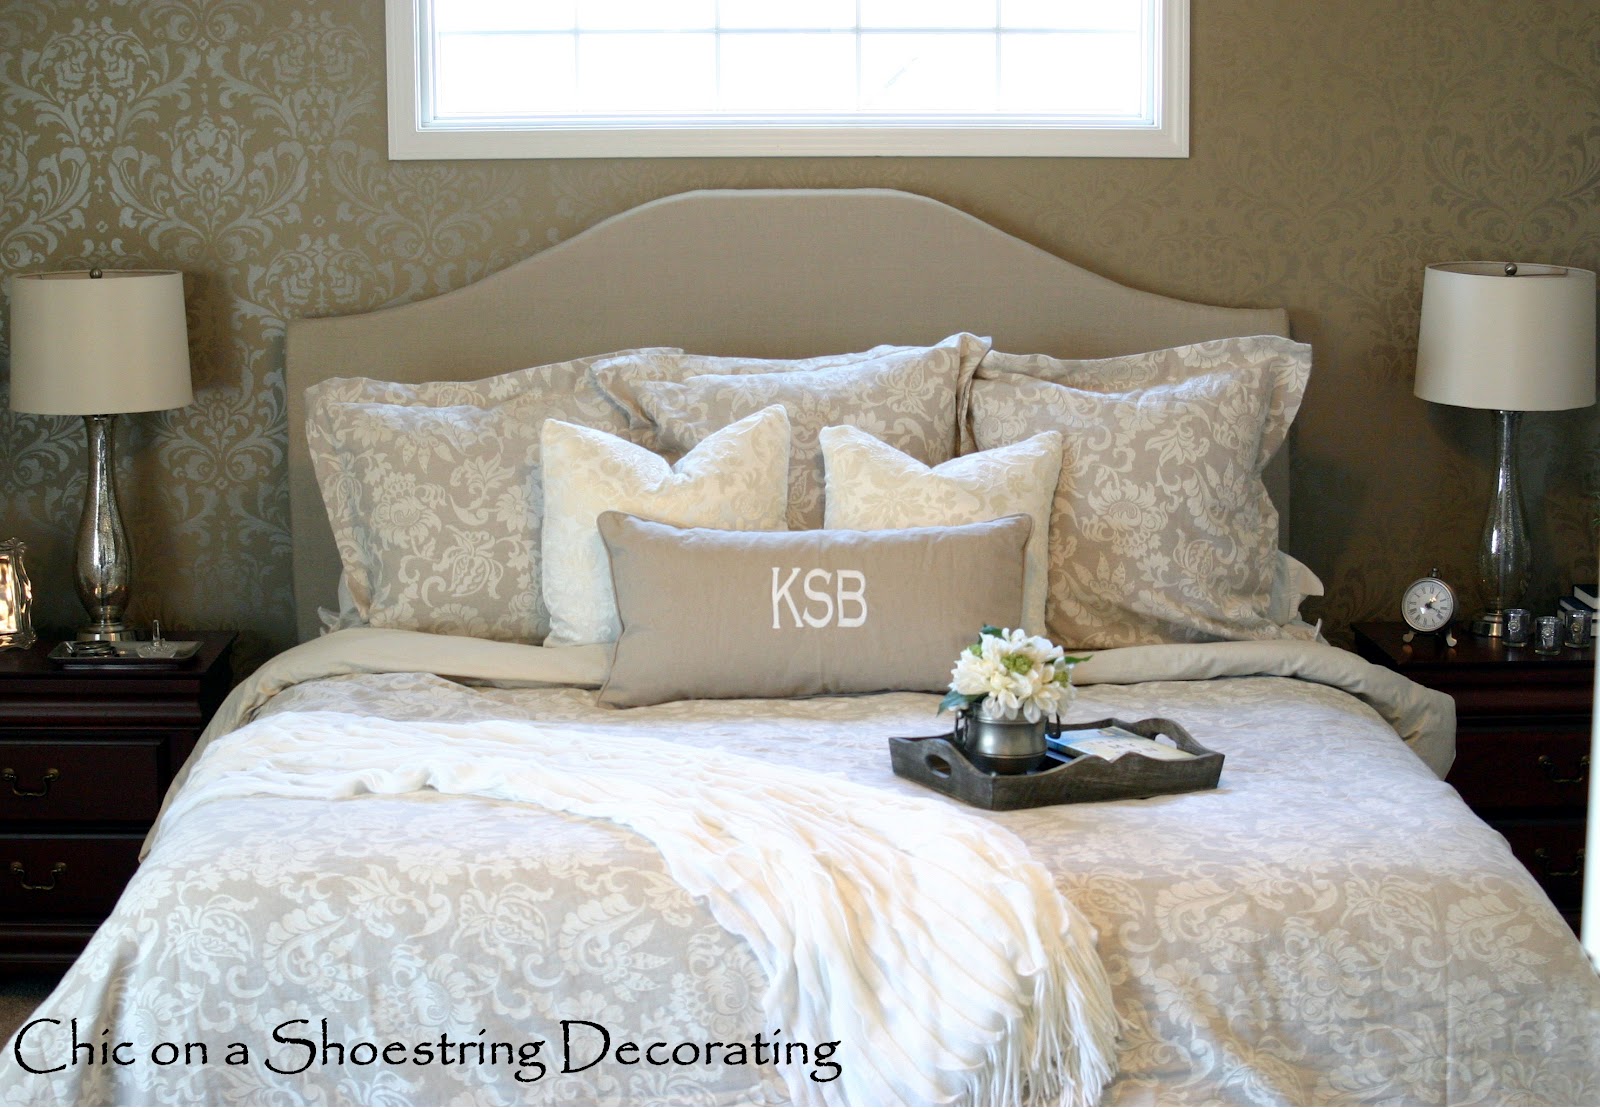 Chic on a Shoestring Decorating iNeutral Master Bedroomi Reveal